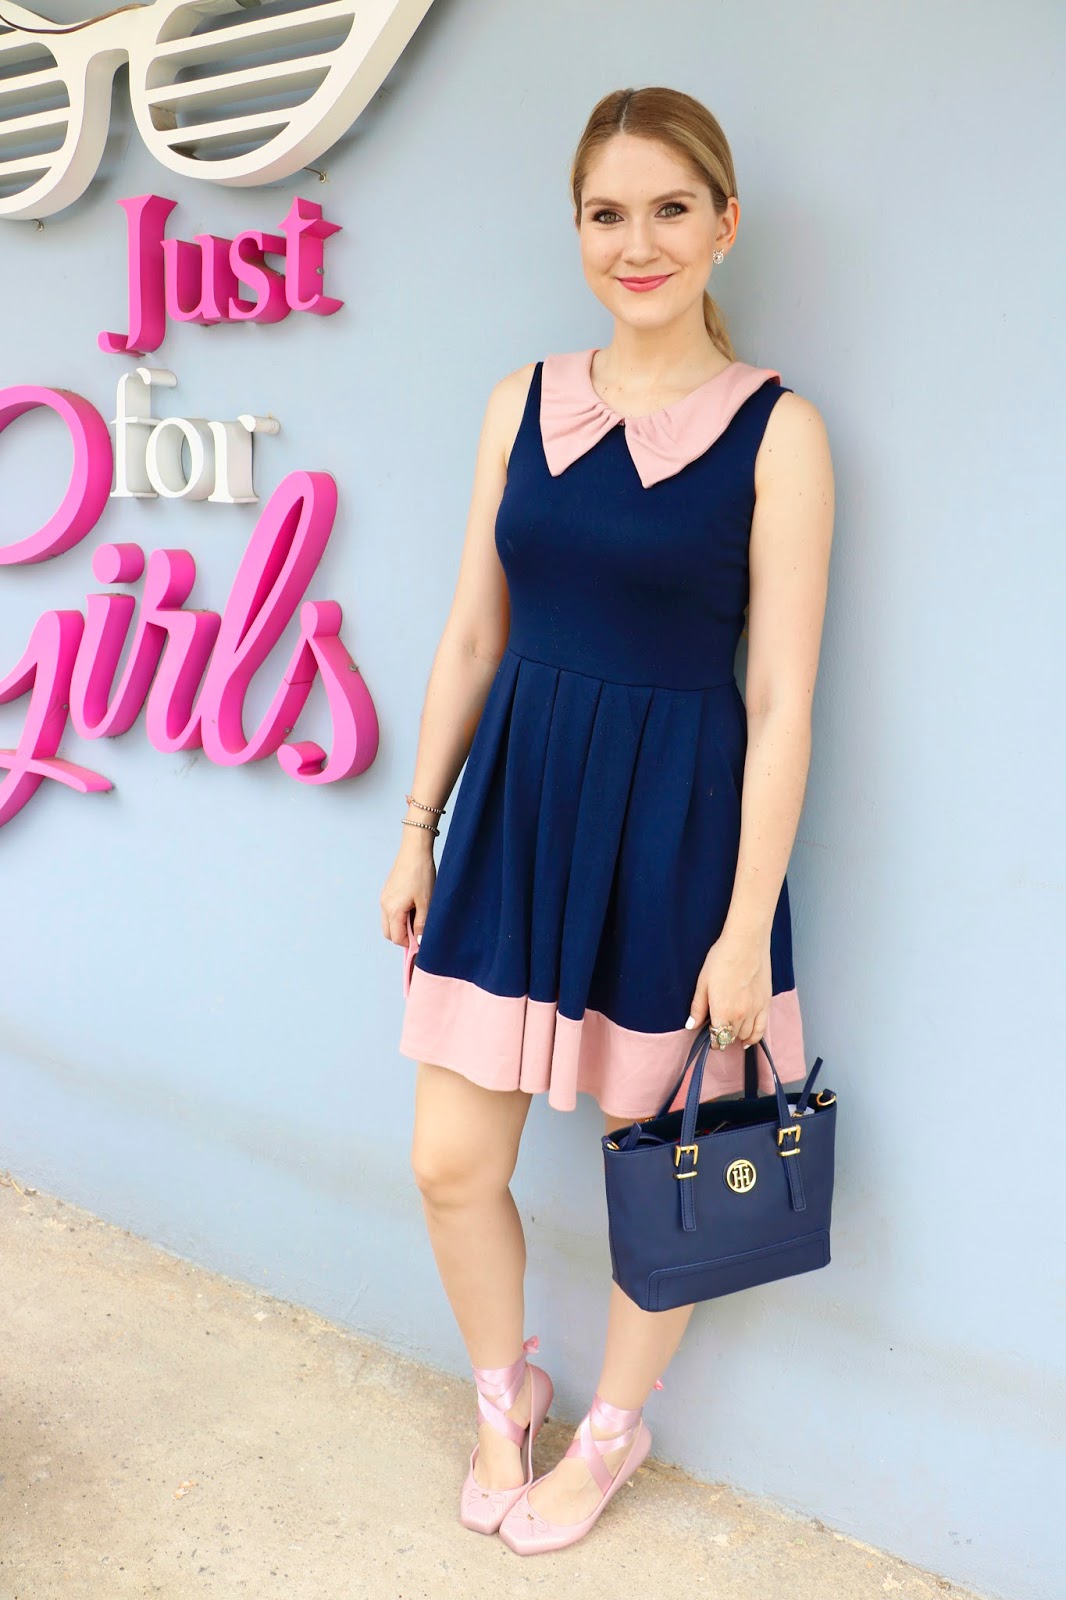 Pretty navy dress and pink ballerinas outfit!